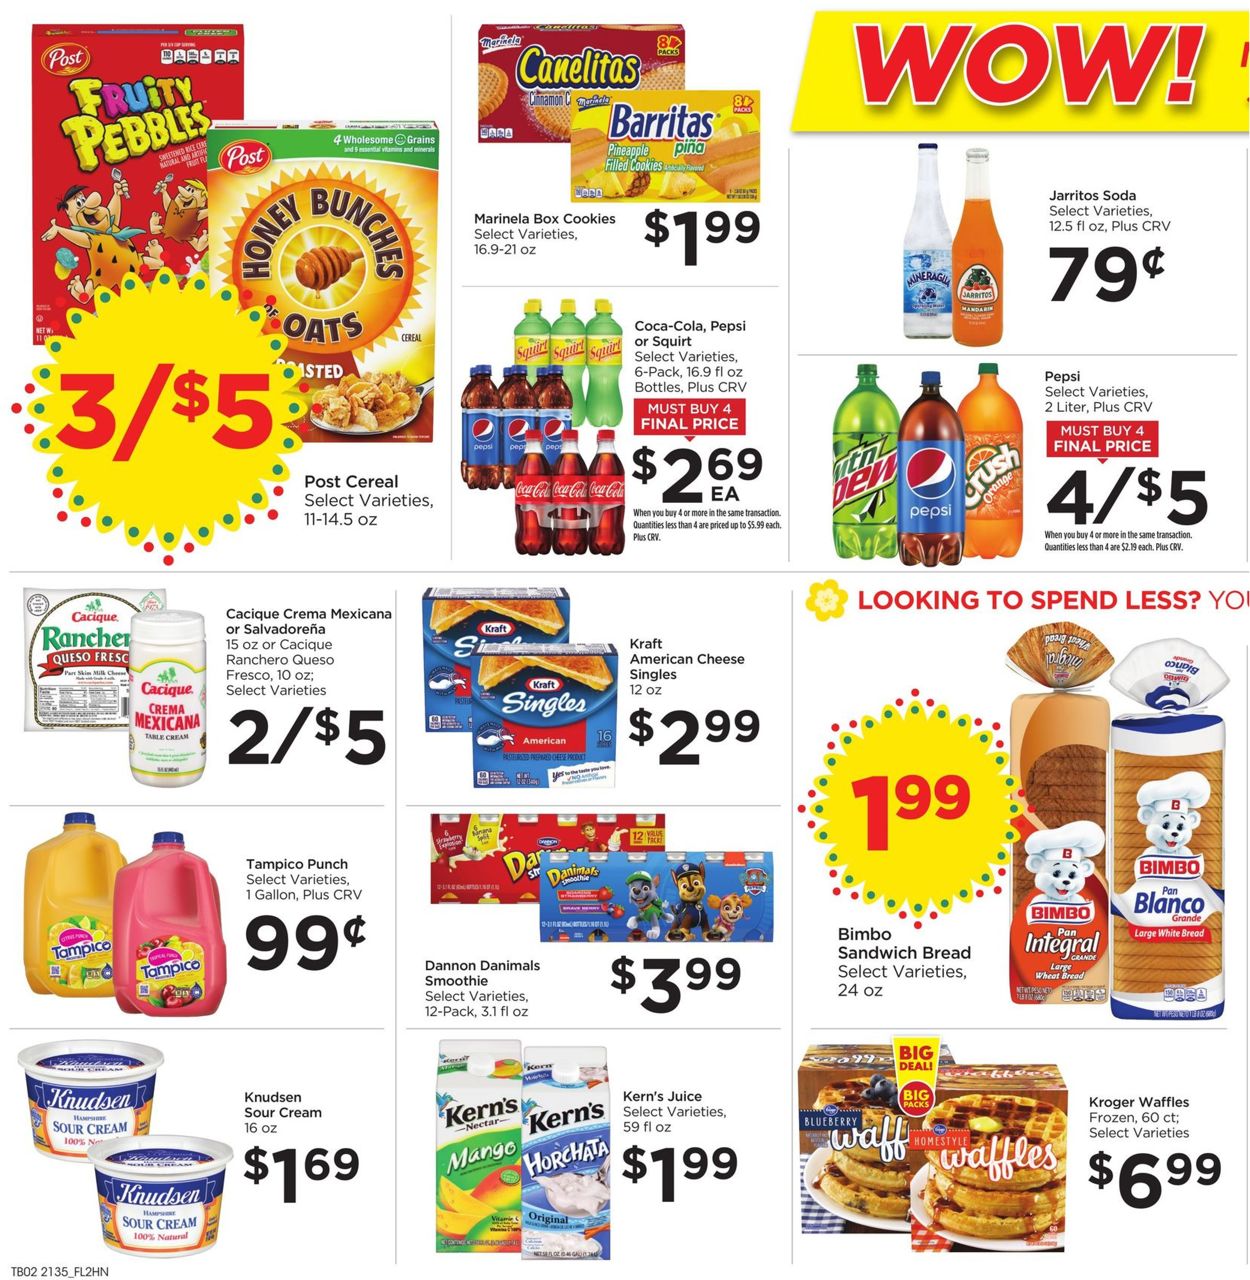 Foods Co. Ad from 09/29/2021